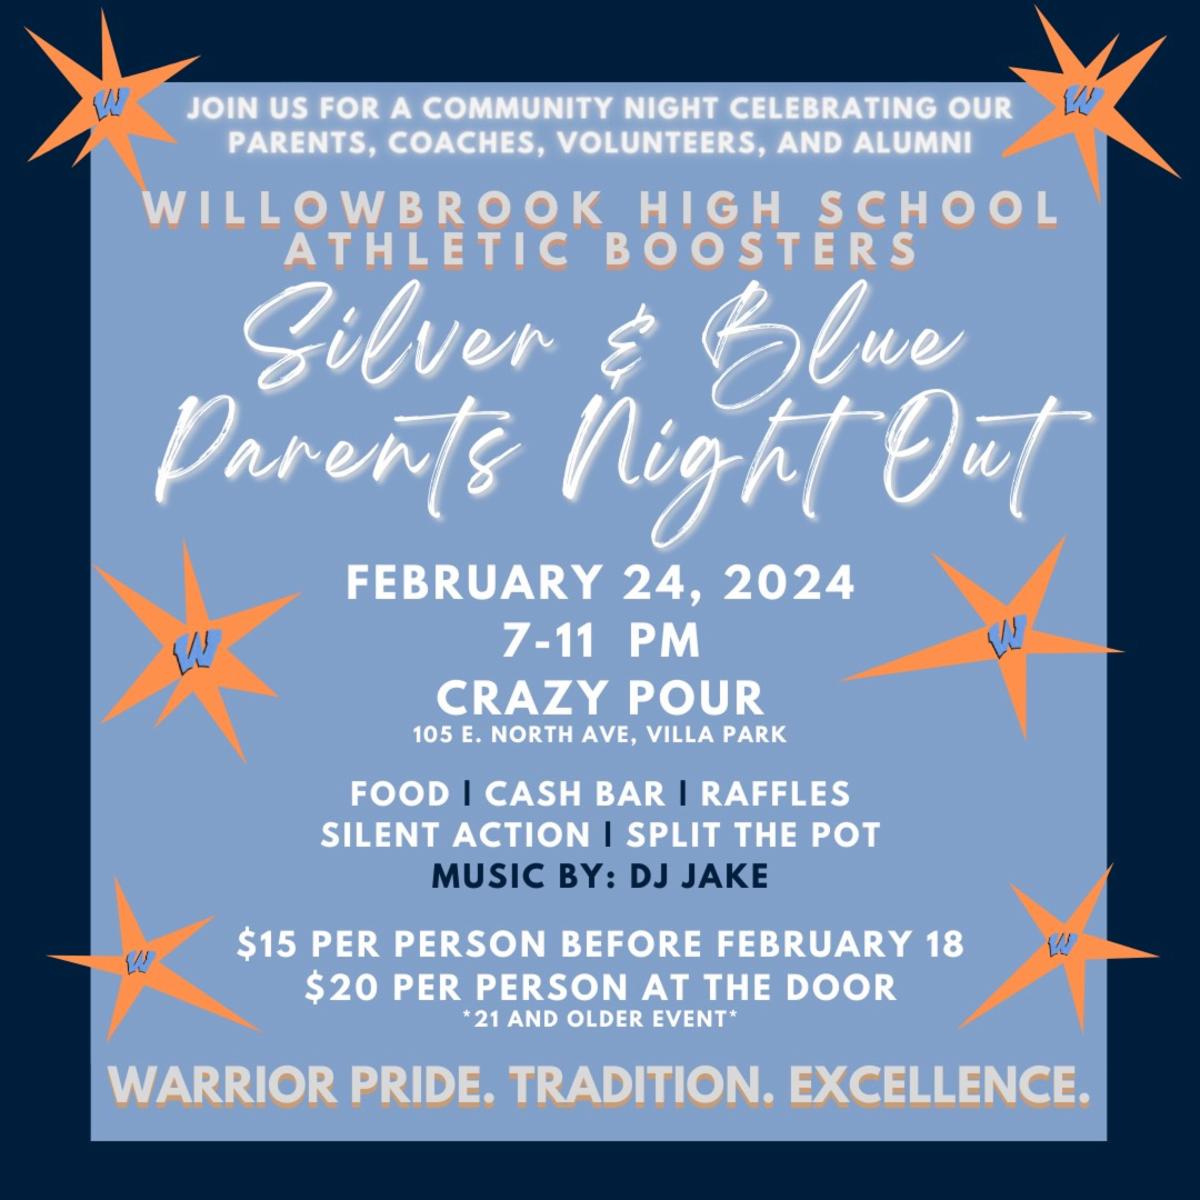 On Feb. 24, the @WillowbrookAth1 will host a “Silver and Blue Parents Night Out” to celebrate the dedication and efforts of @WillowbrookHS1 parents and to thank them for all they do to support the school. See important details at dupage88.net/site/page/15982.